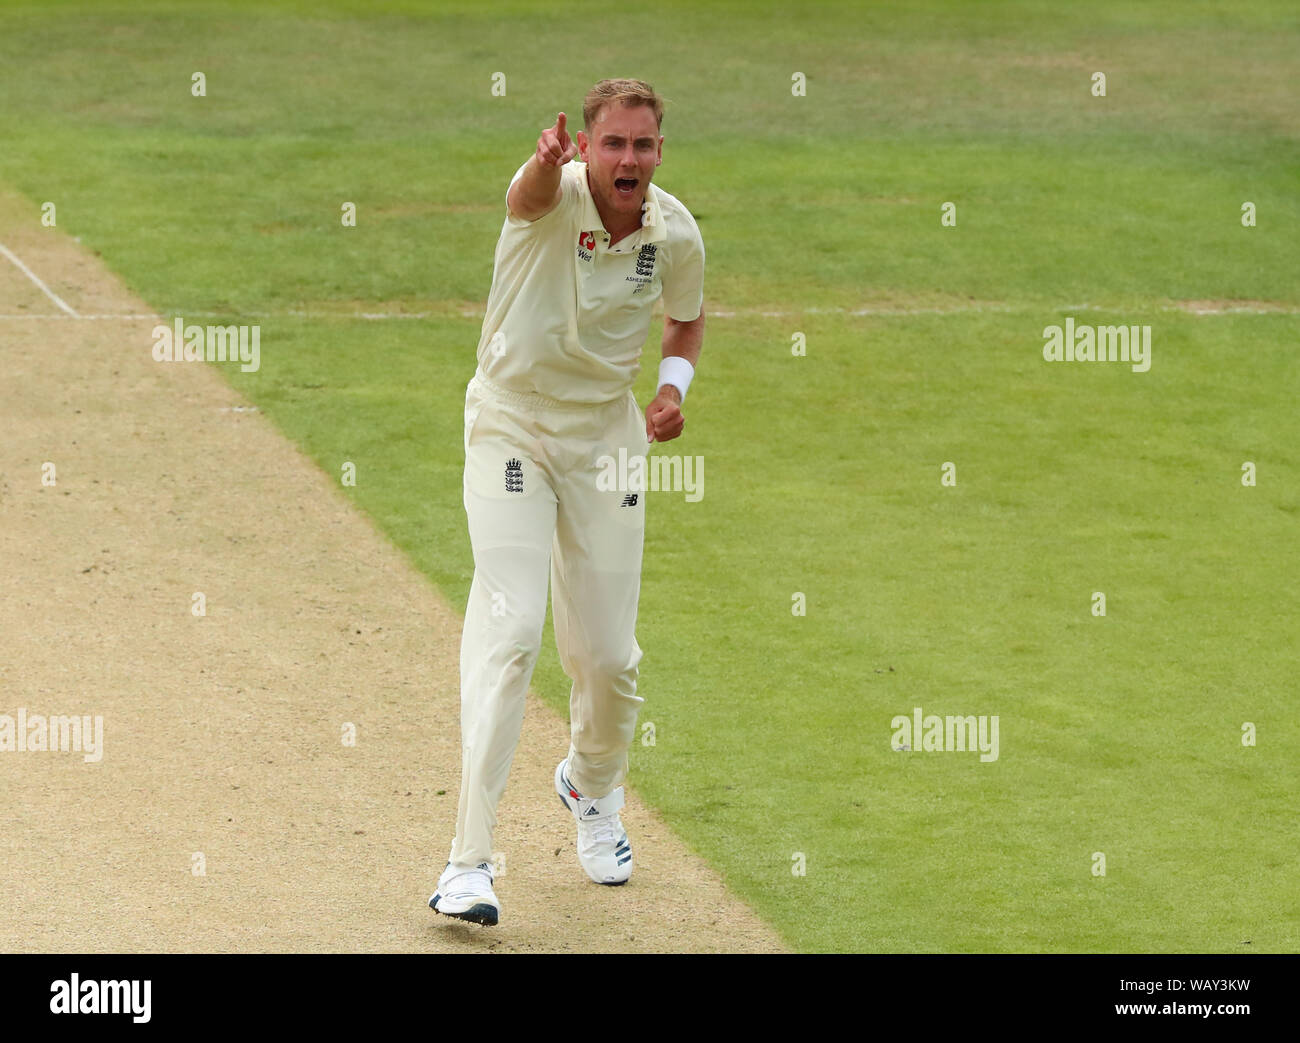 Leeds, UK. 22nd Aug, 2019. Stuart Broad of England makes an unsuccessful appeal for a wicket during day one of the 3rd Specsavers Ashes Test Match, at Headingley Cricket Ground, Leeds, England. Credit: ESPA/Alamy Live News Stock Photo